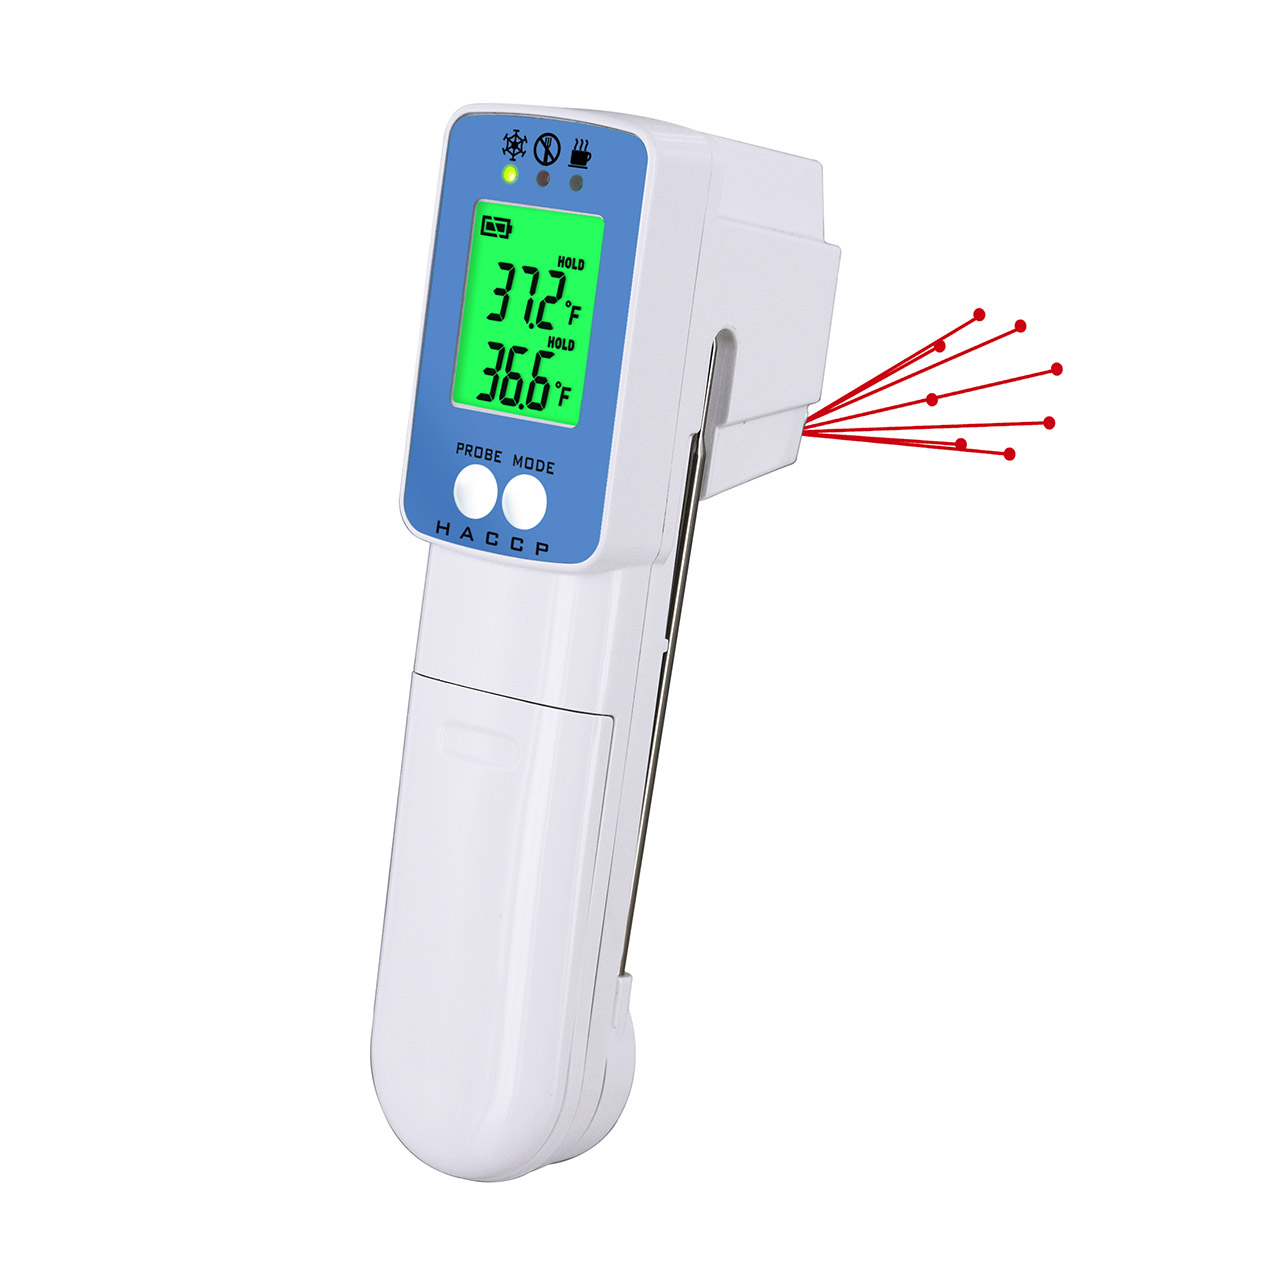 http://www.freezerwear.com/Shared/Images/Product/33034-8-Point-Infrared-Laser-Thermometer/Samco_-33034-INFRARED-LASER-2-IN-1-THERMOMETER.jpg